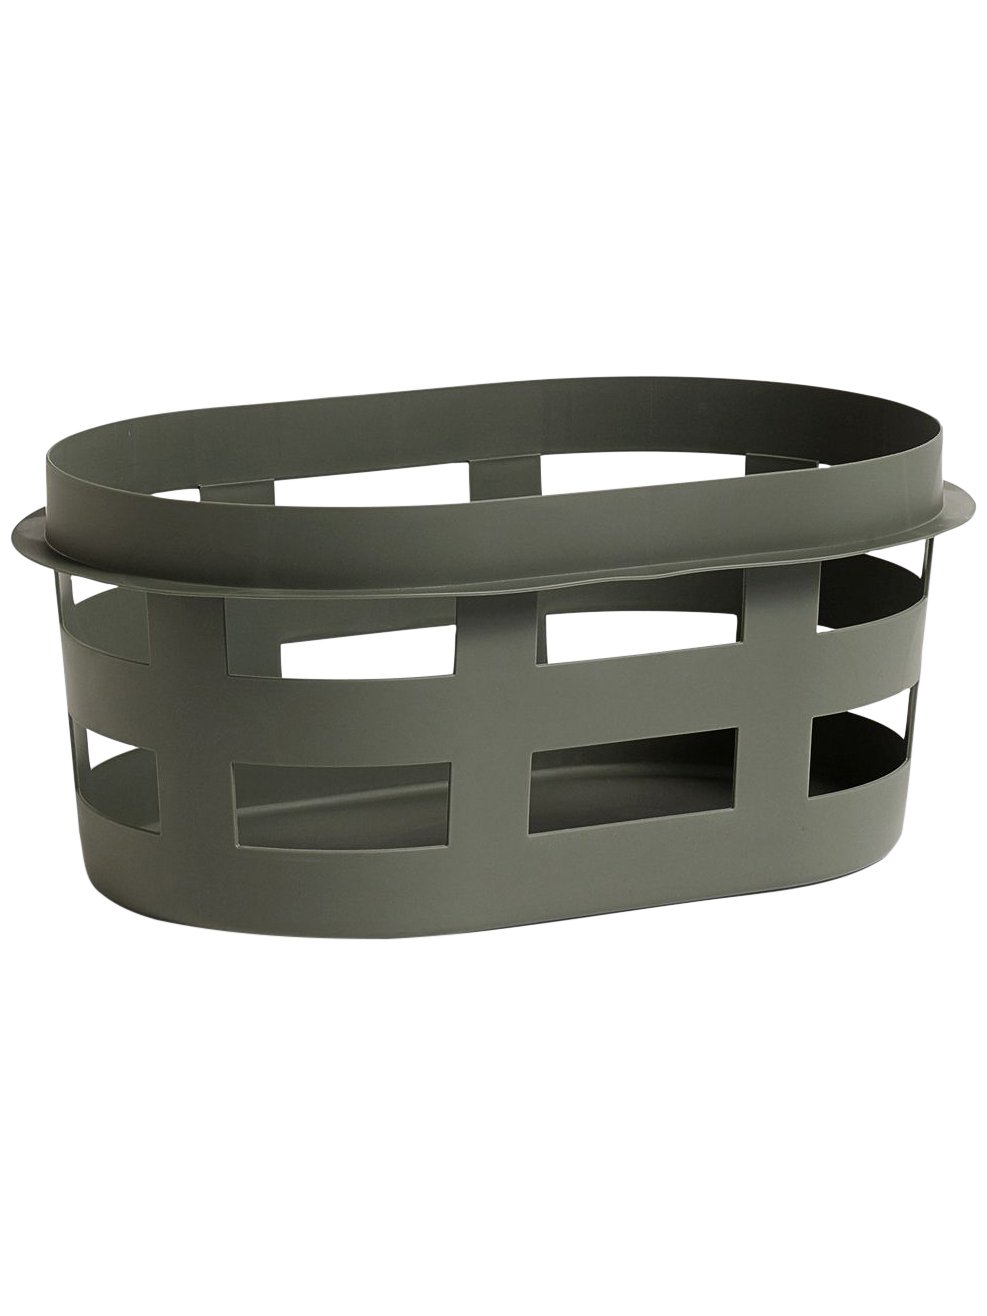 HAY - Laundry Basket Small - Army (505960)